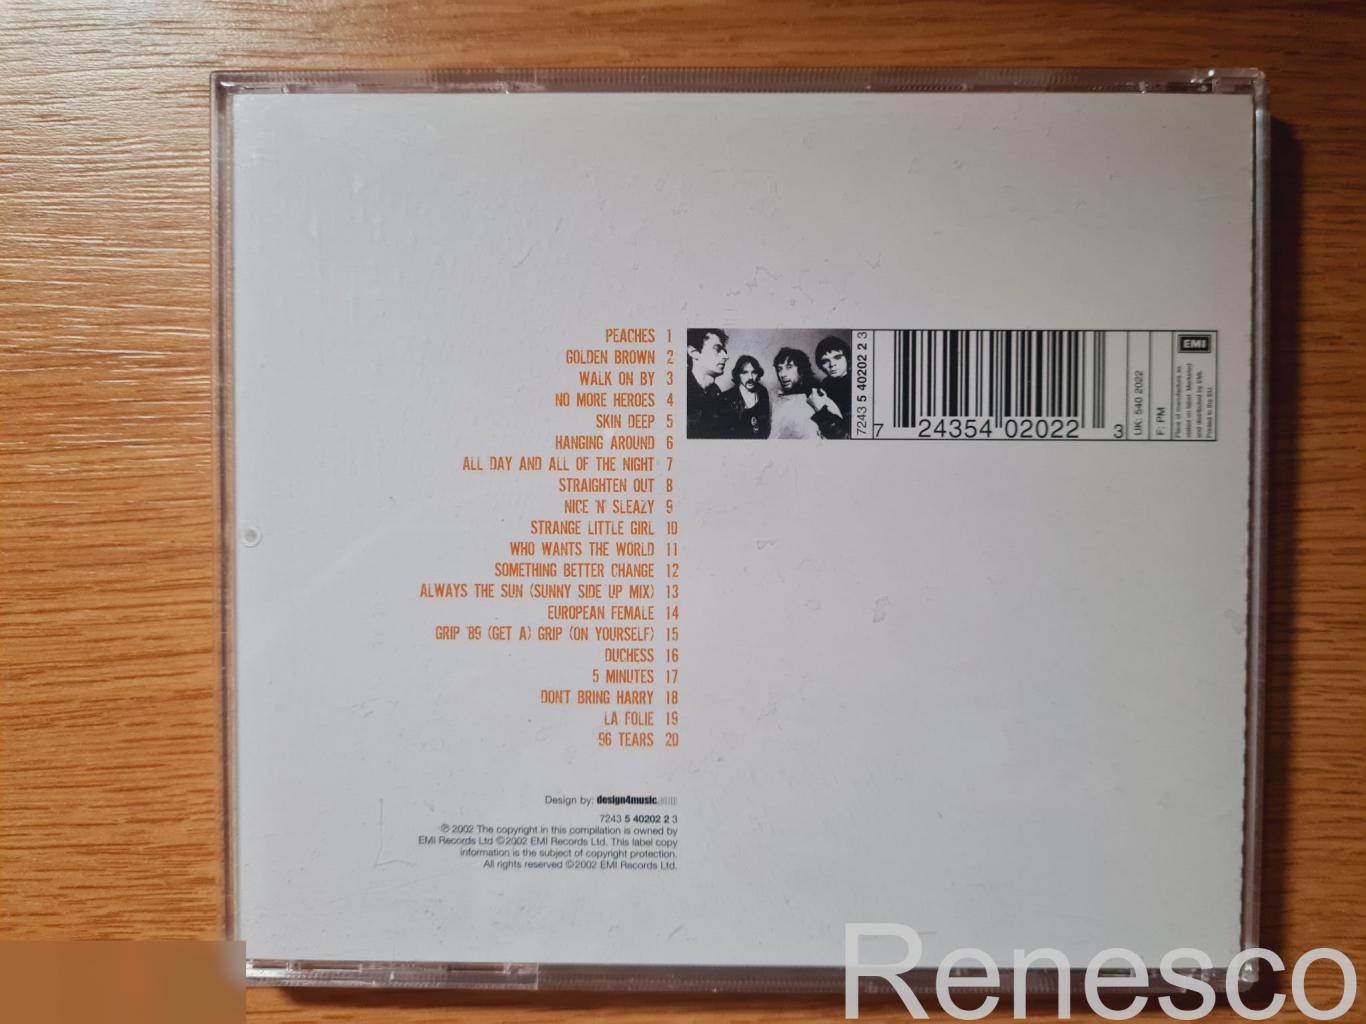 The Stranglers ?– Peaches: The Very Best Of The Stranglers (Europe) (Reissue) 1